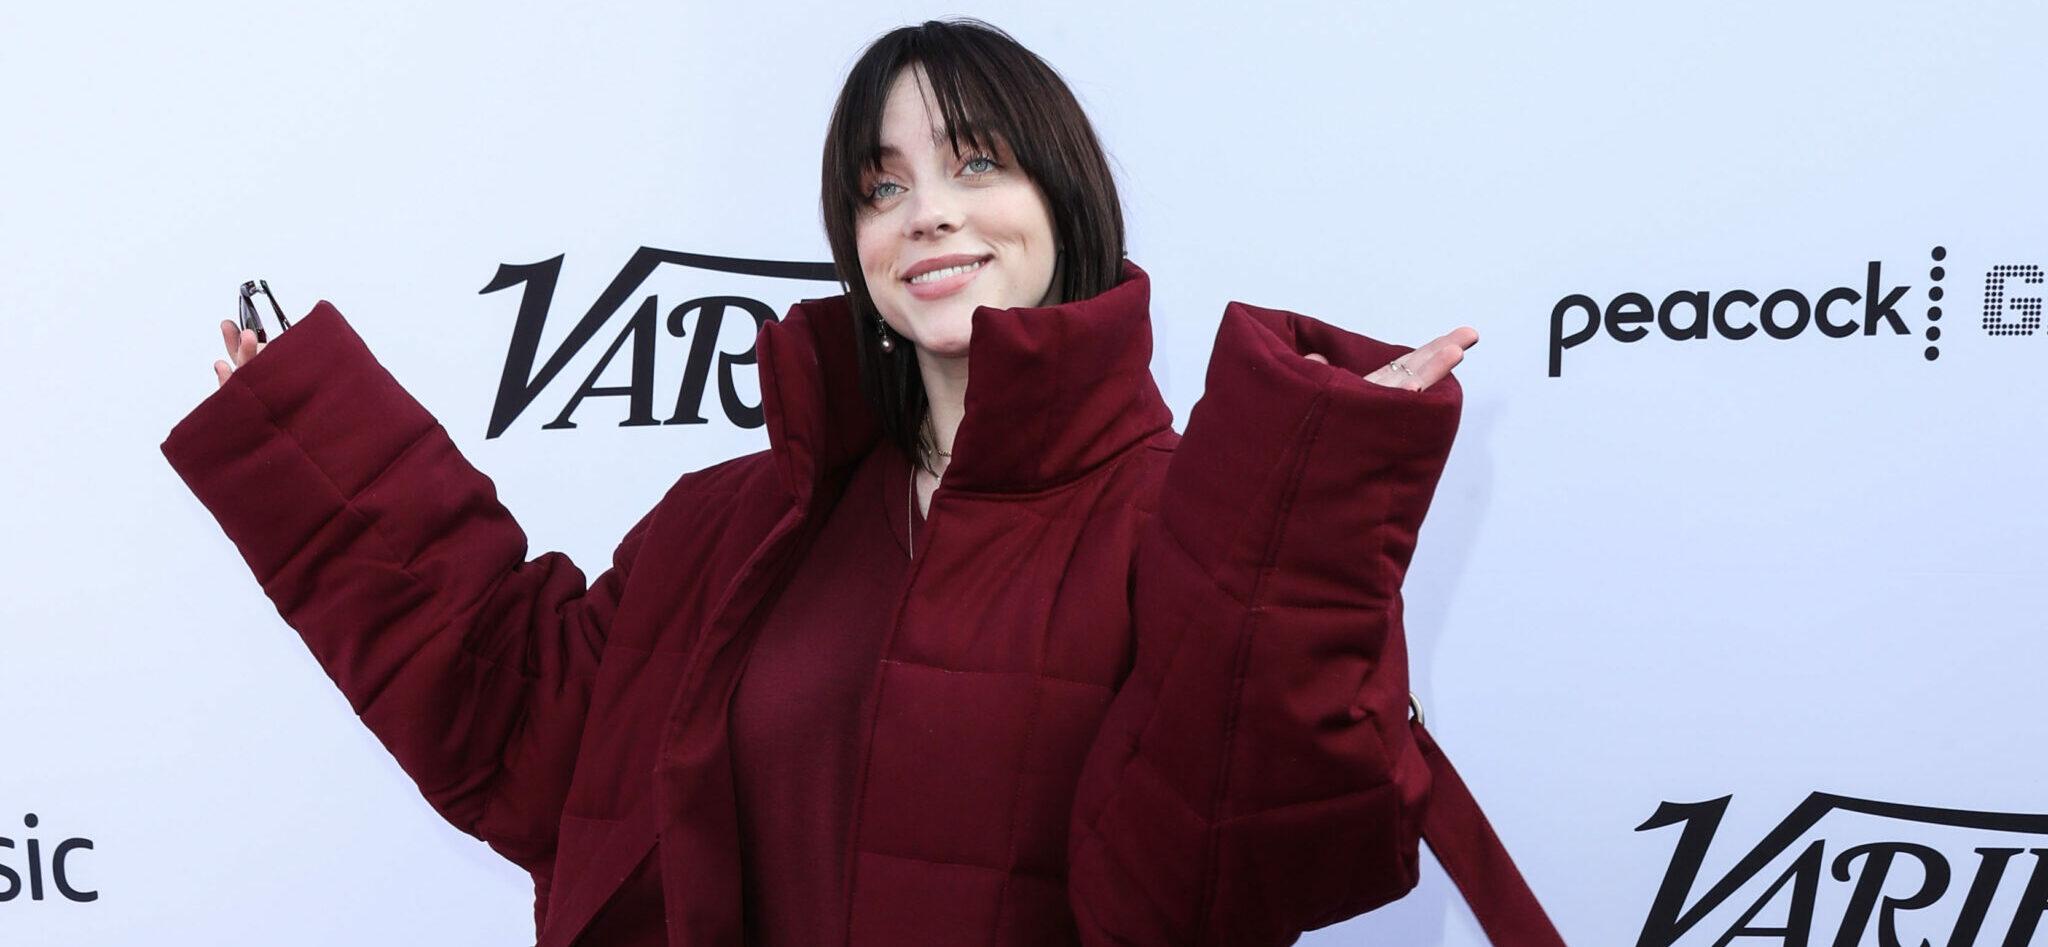 Billie Eilish Showed Off Insane PDA With BF At Variety Hitmakers Ceremony!